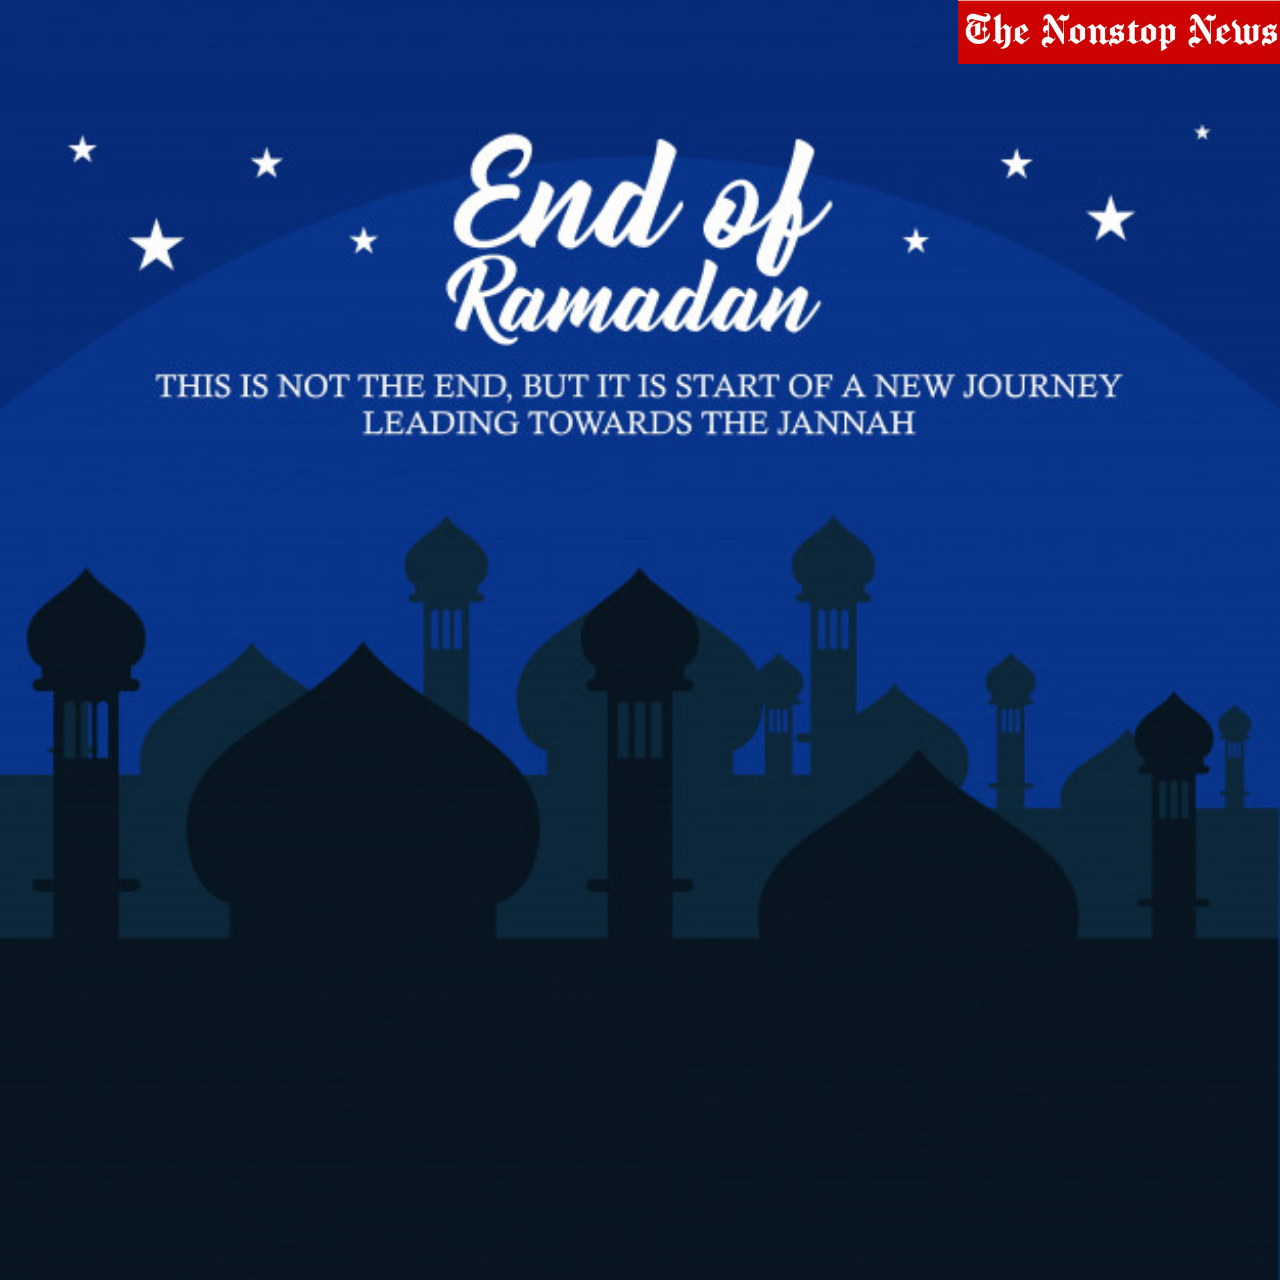 Happy End Ramadan 2021 Wishes, Quotes, WhatsApp Status, Greetings, Dua, and Messages to Share